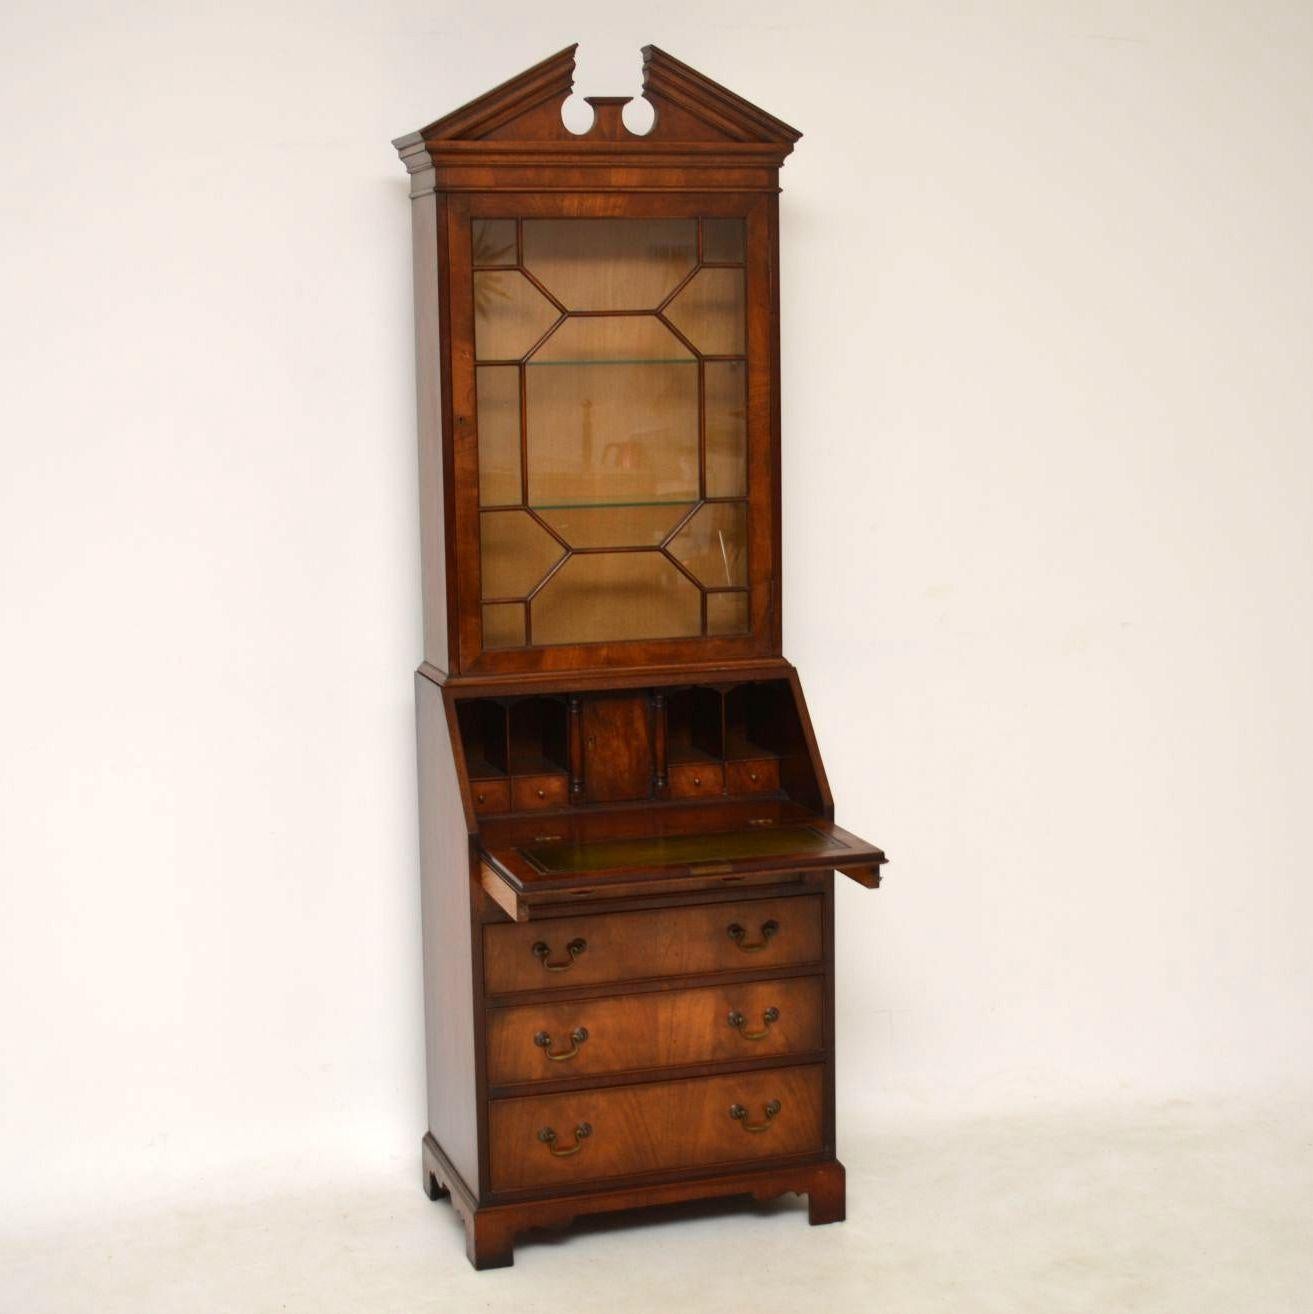 Slim antique Georgian style mahogany bureau bookcase in very good condition and dating from circa 1950s period. It has a sharp double pediment on the top and single astral glazed door below with two glass shelves inside. The fall front is flame